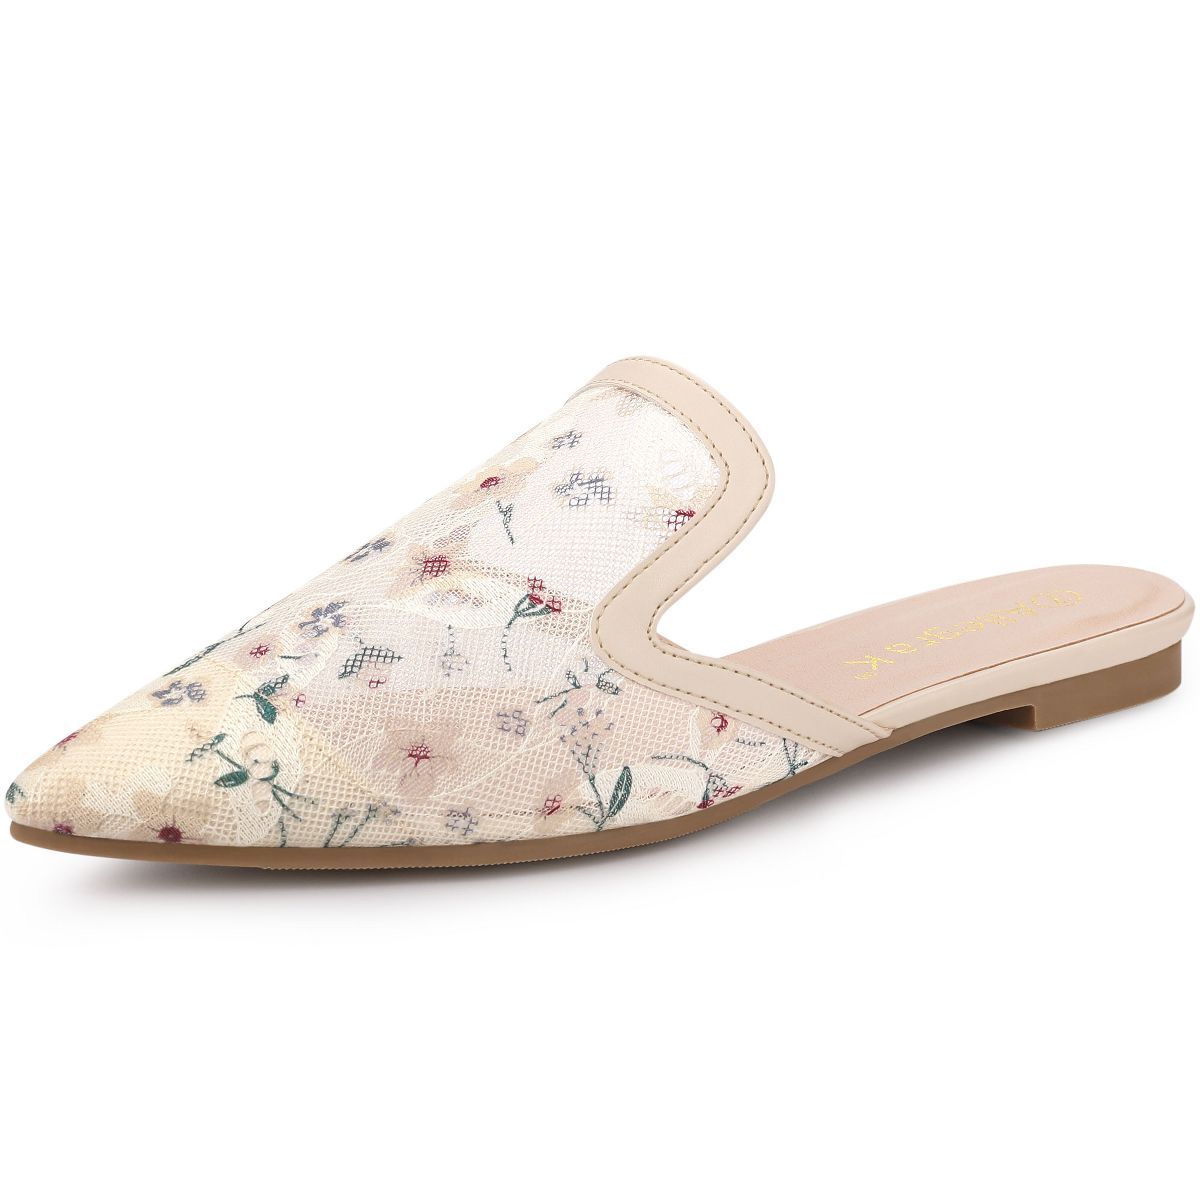 Allegra K Women's Pointed Toe Floral Embroidery Flats Mules | Target